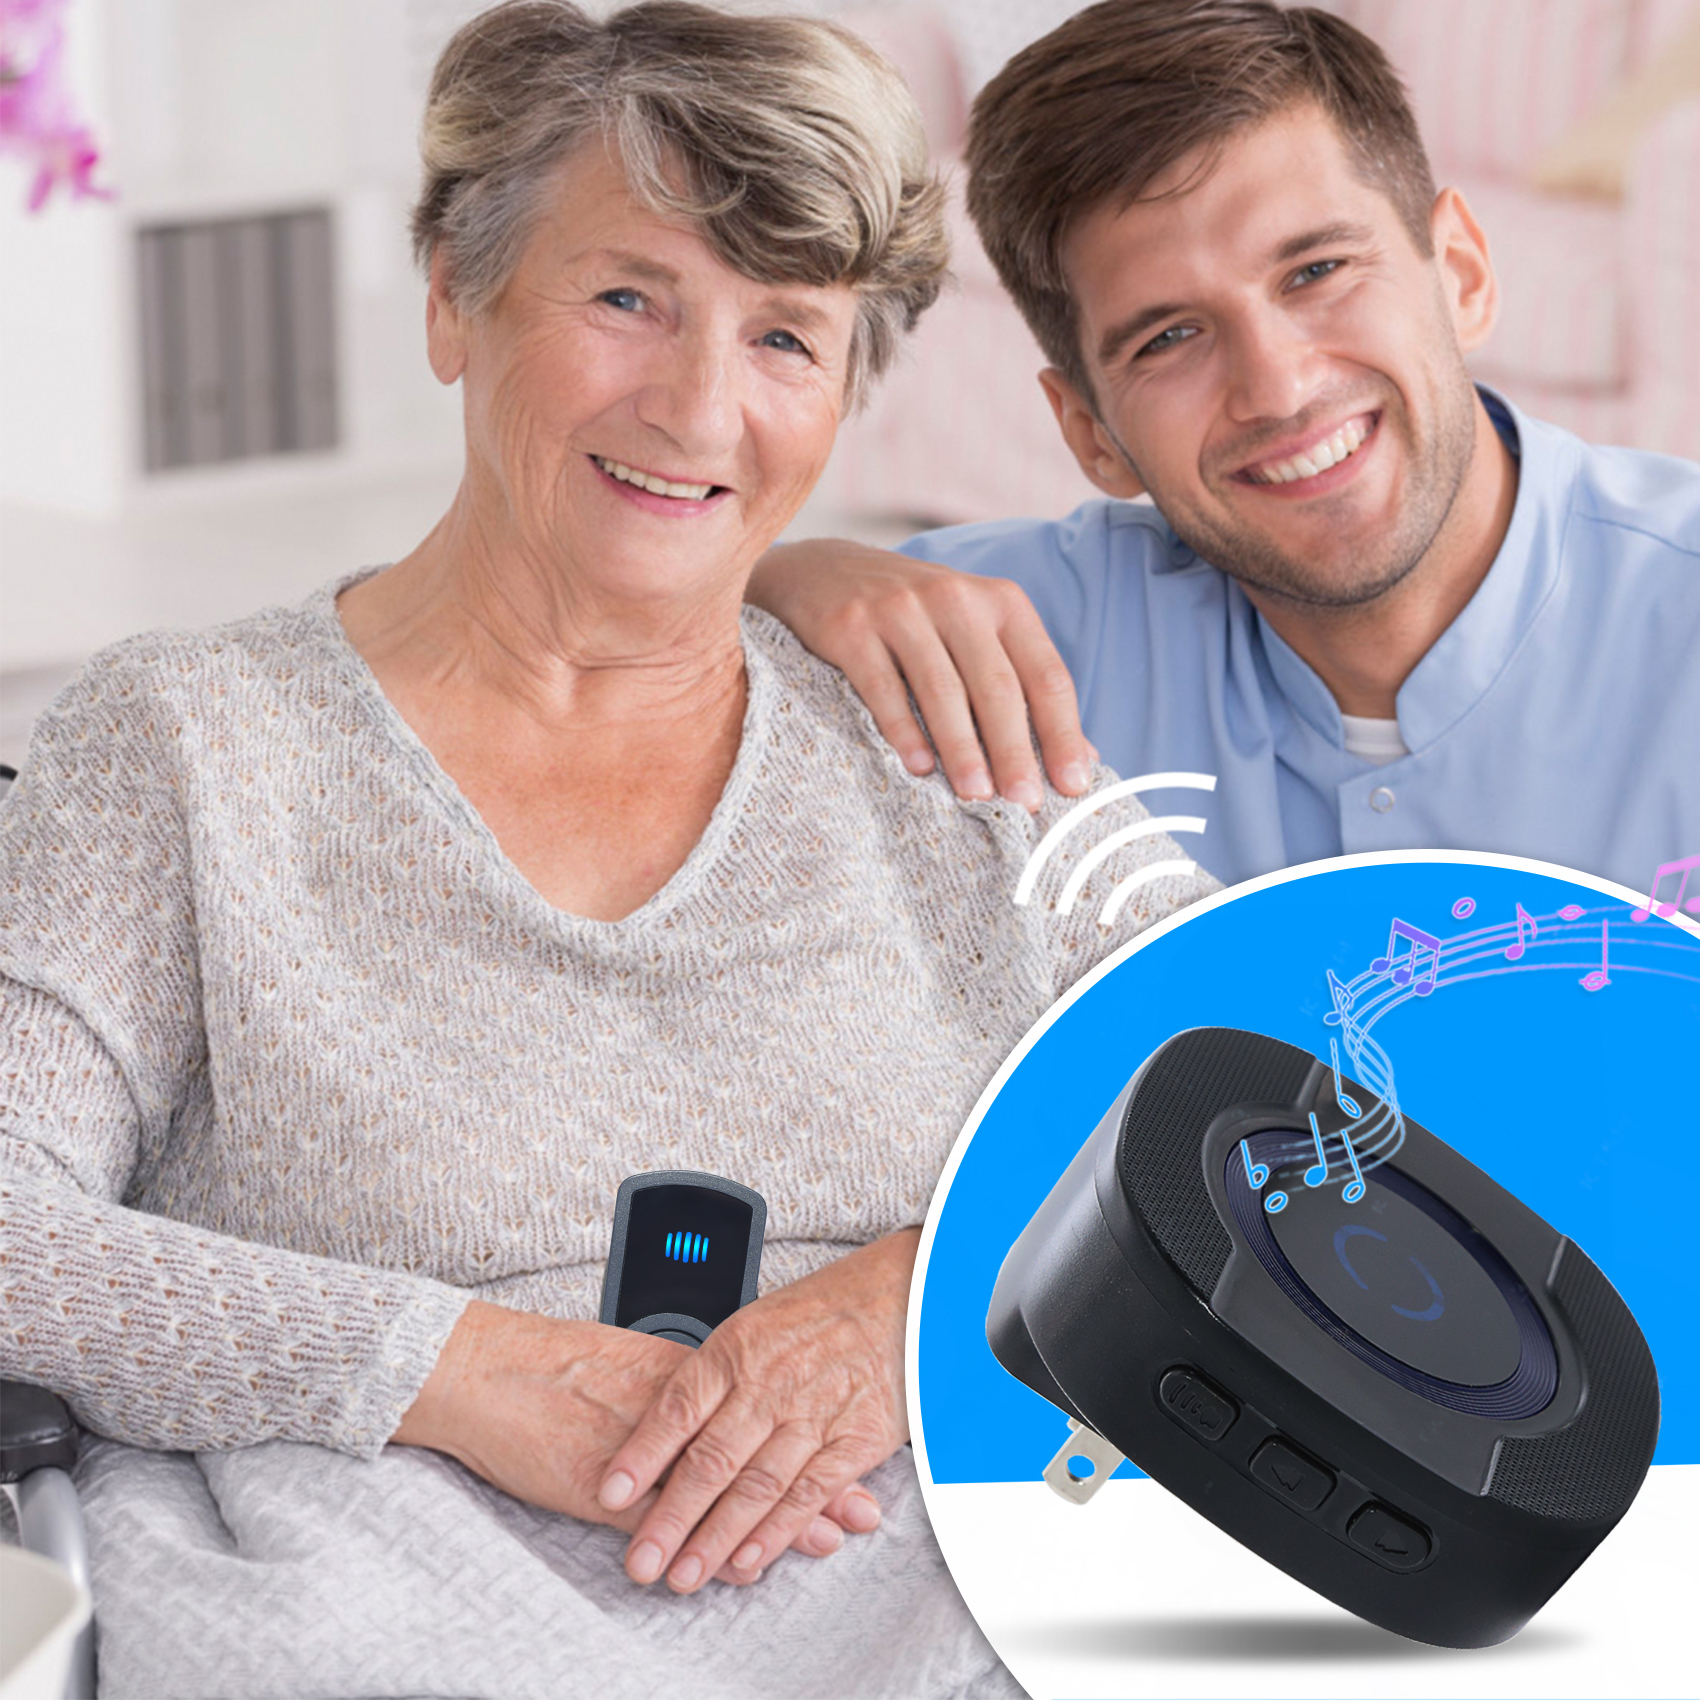 The benefits and advantages of home pagers to customers